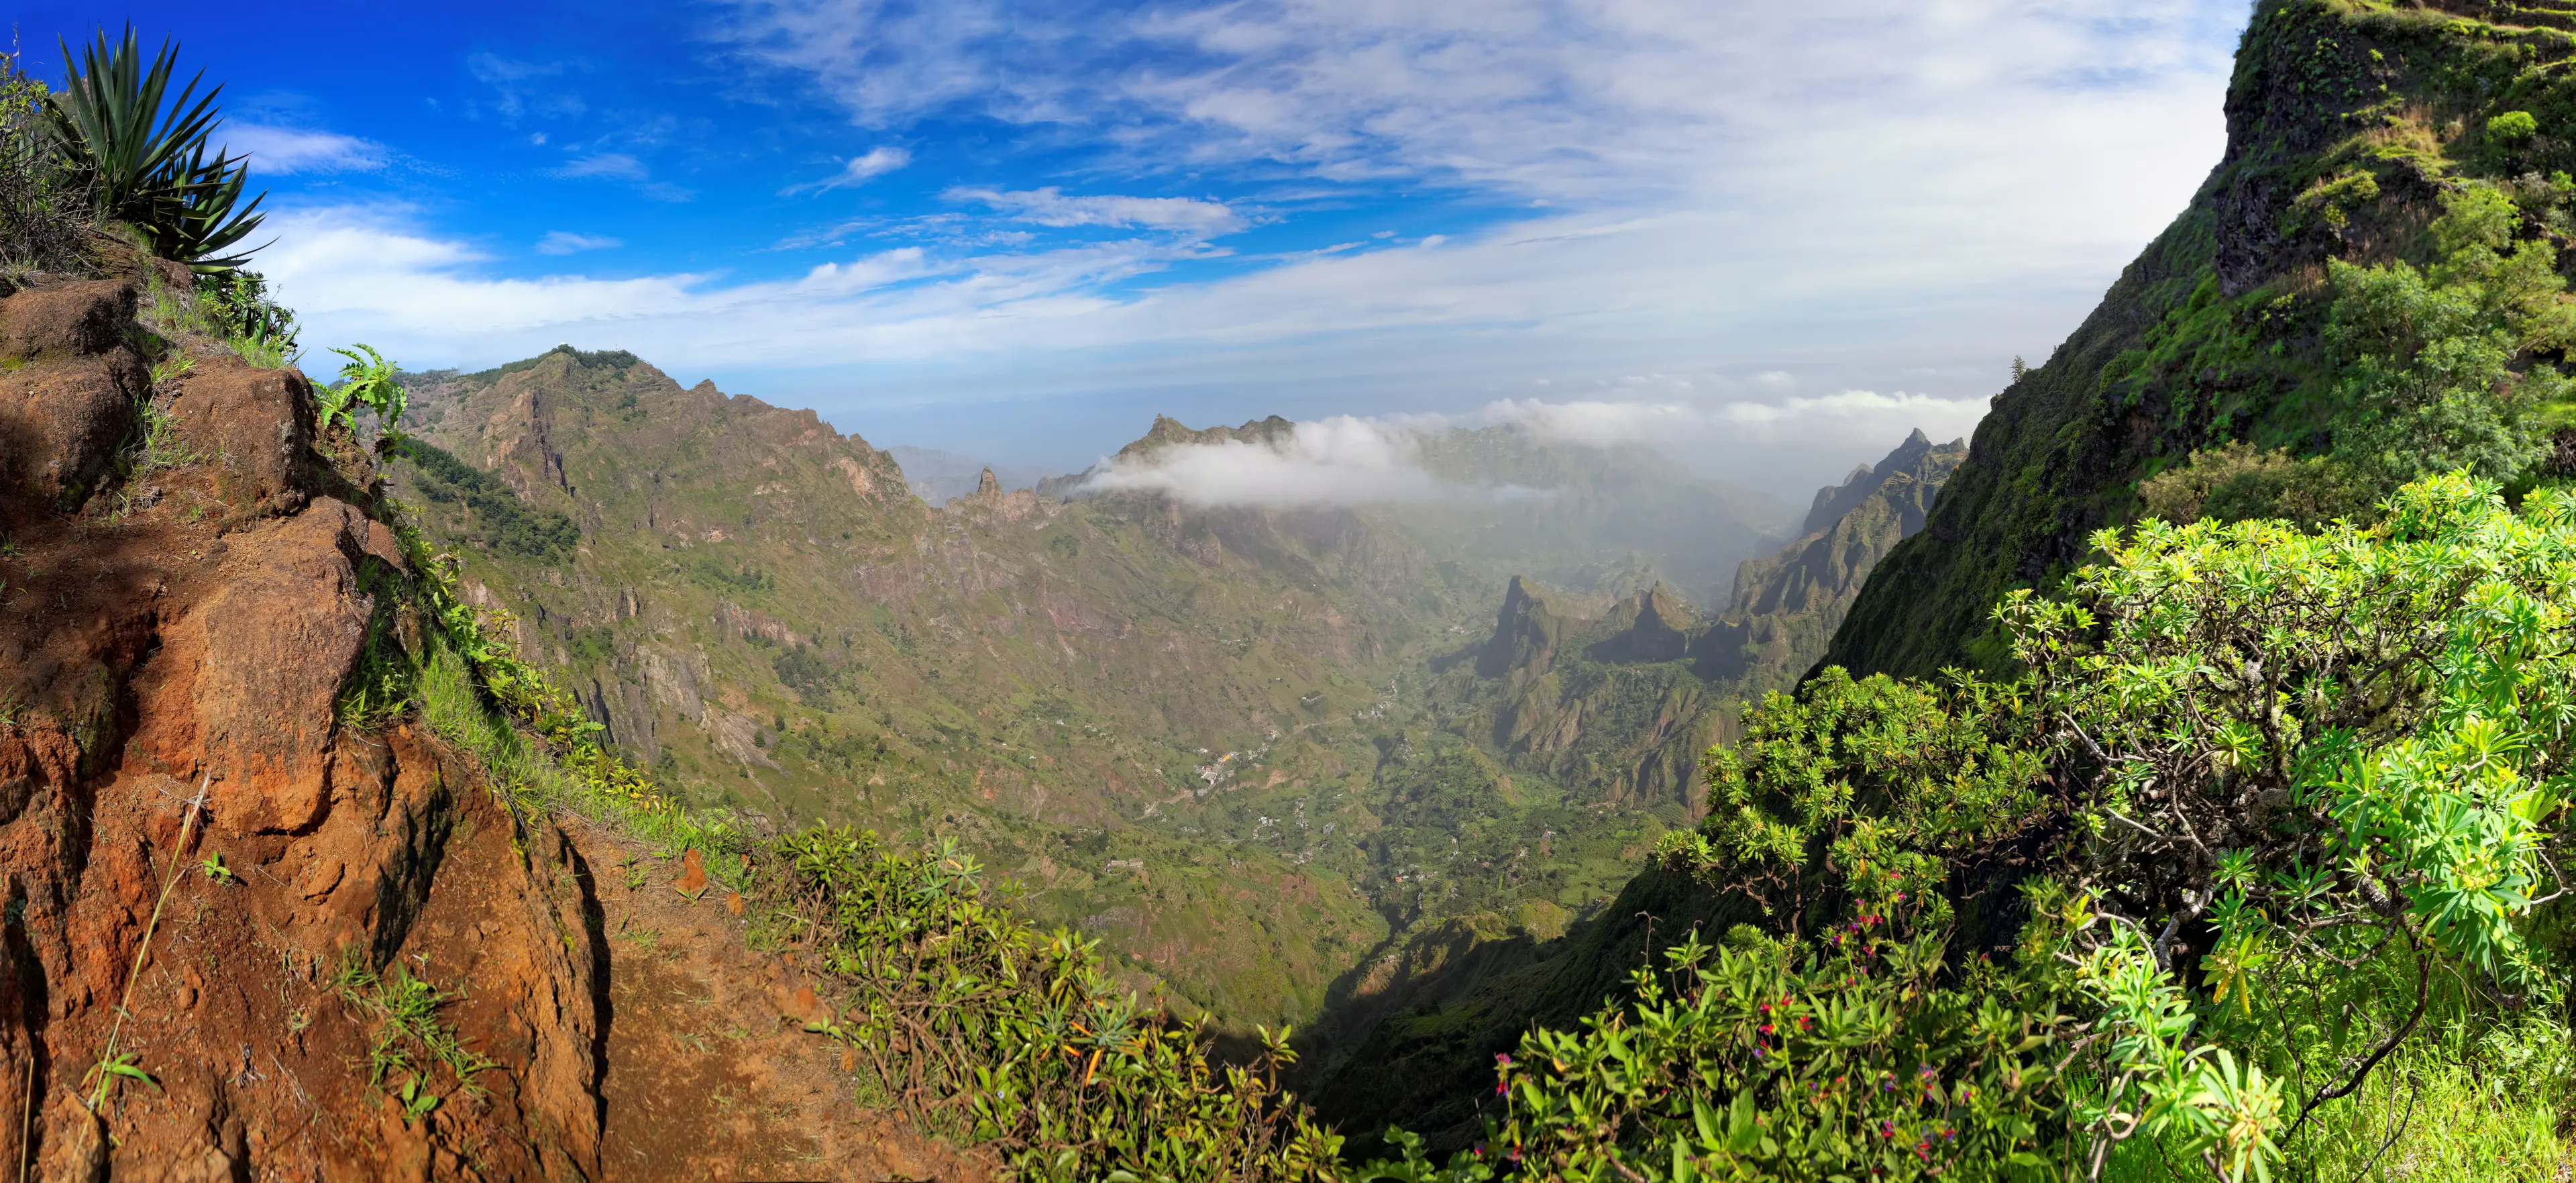 6-Day Solo Adventure: Outdoor Activities and Sightseeing in Cape Verde